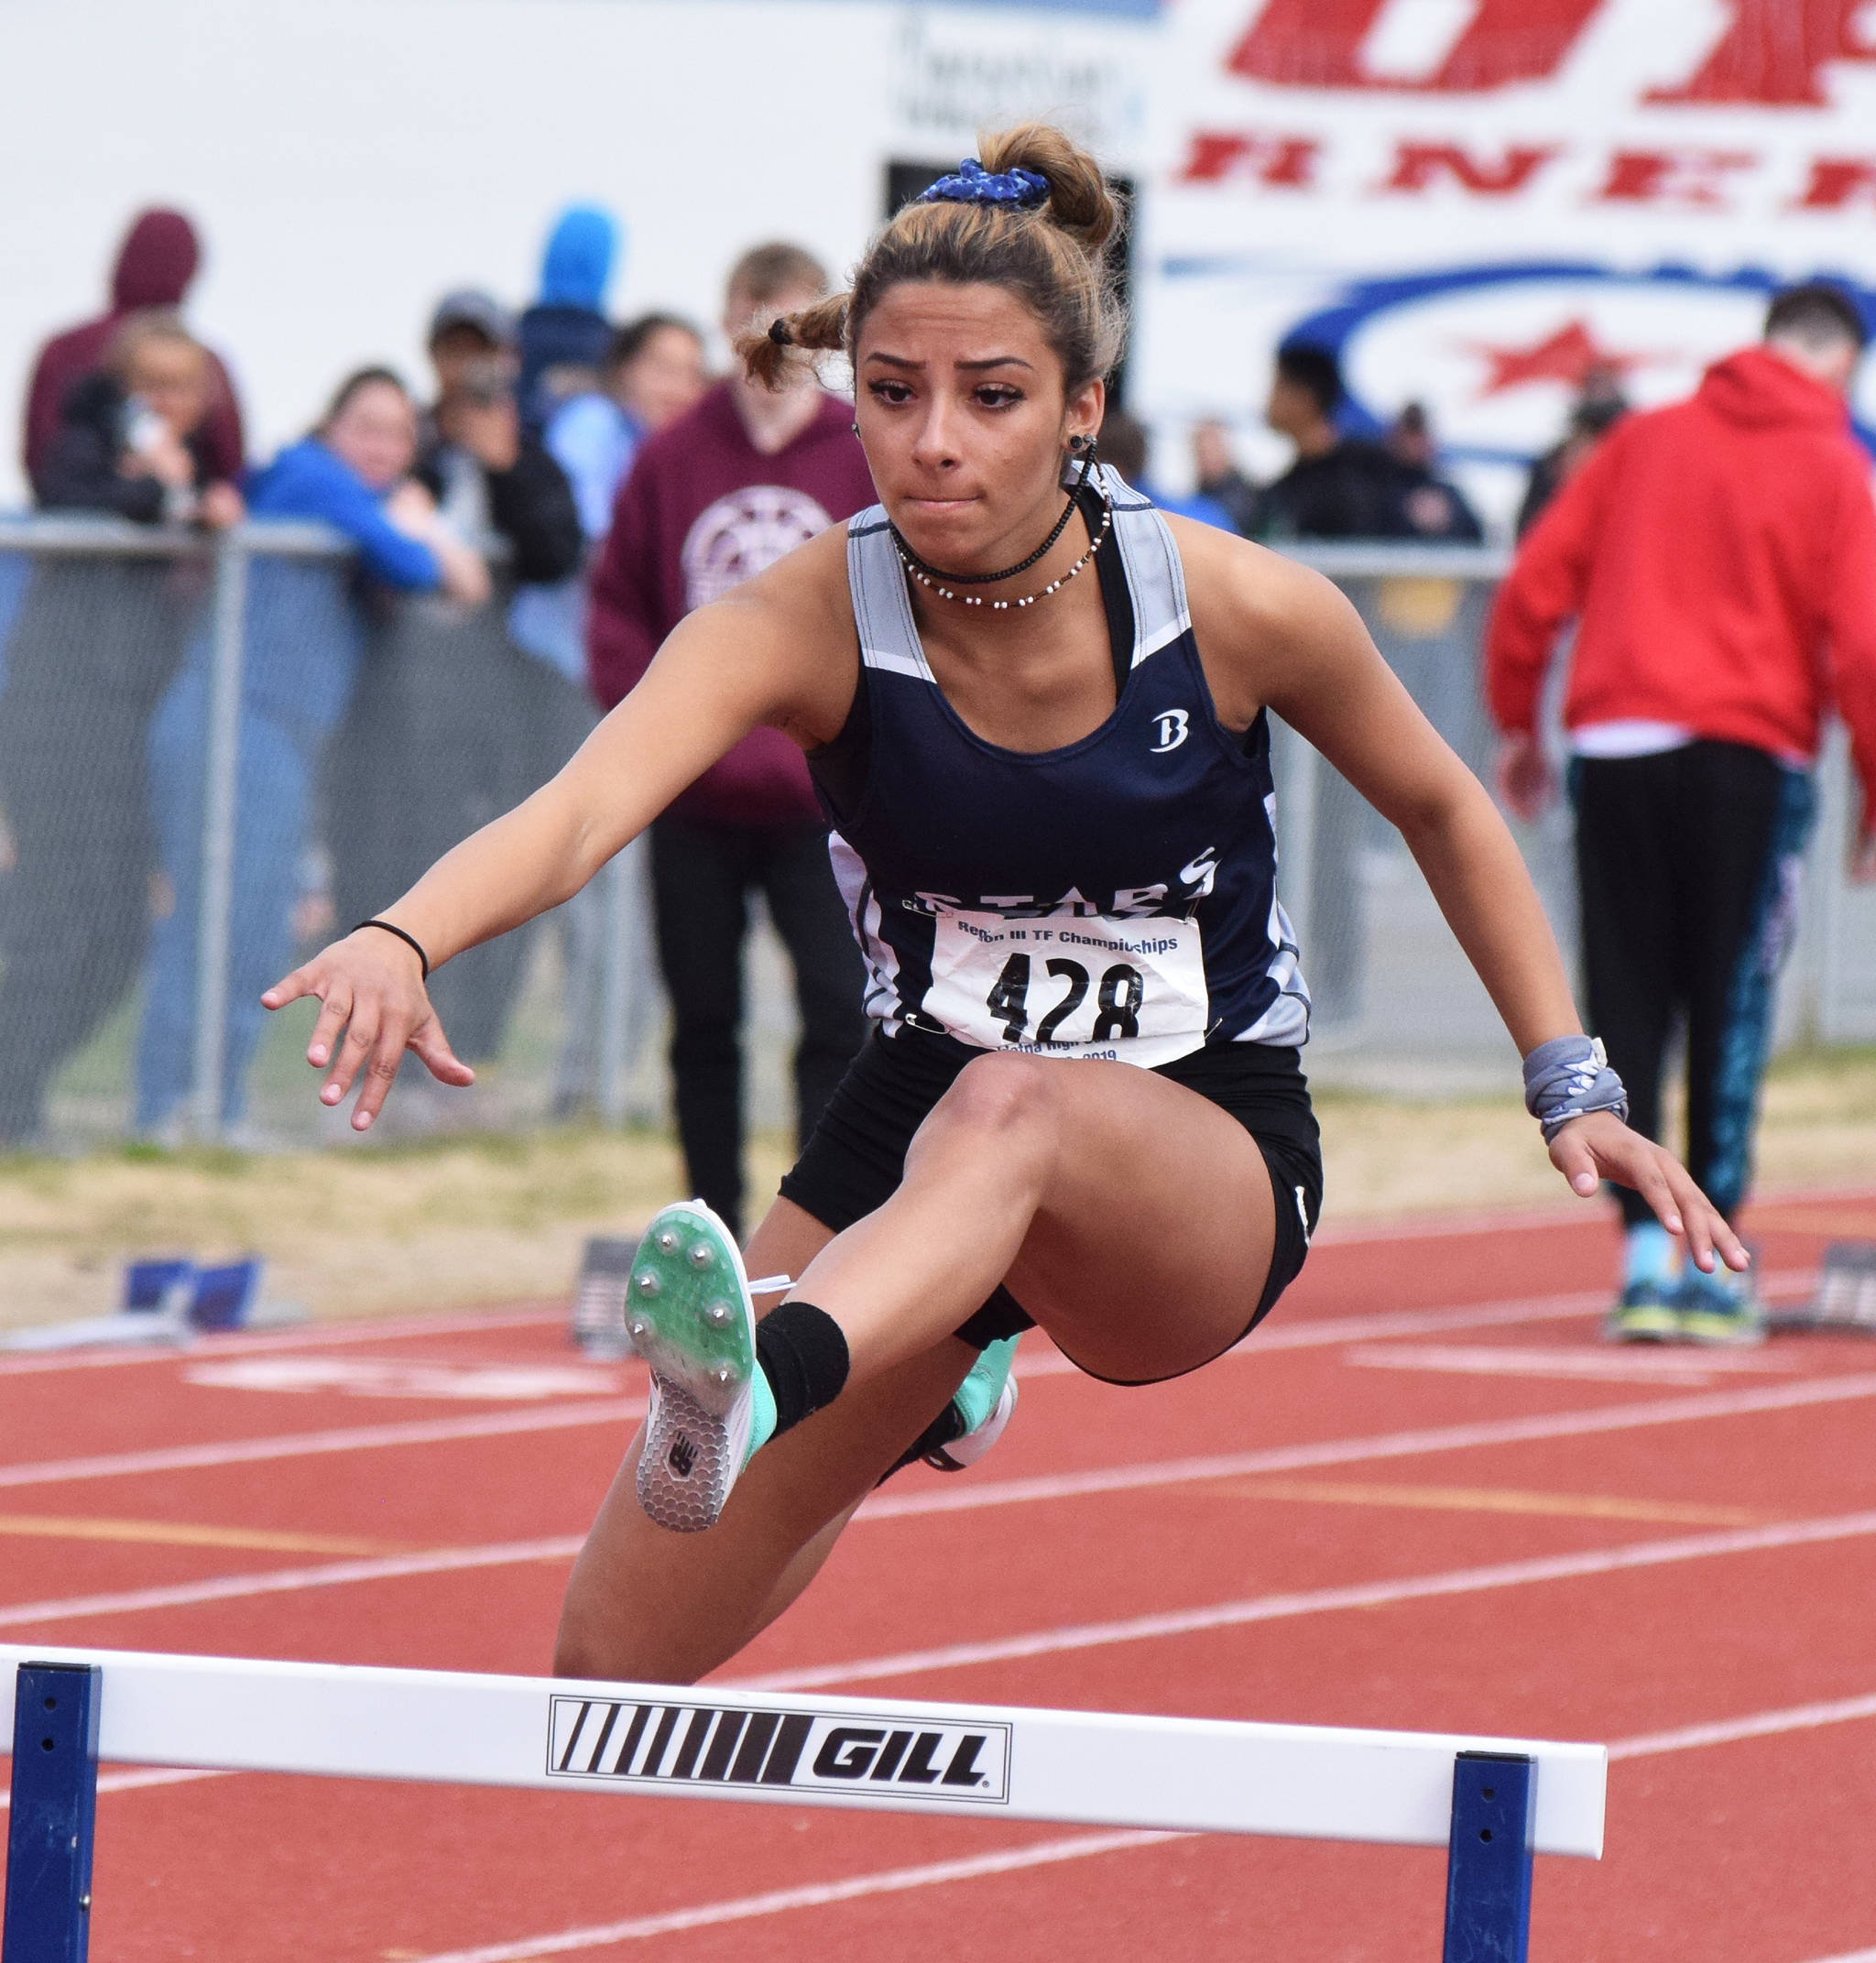 Soldotna’s Holleigh Jaime races in the Class 4A girls 300-meter hurdles final Saturday, May 18, 2019, at the Region III Track and Field Championships in Soldotna, Alaska. (Photo by Joey Klecka/Peninsula Clarion)